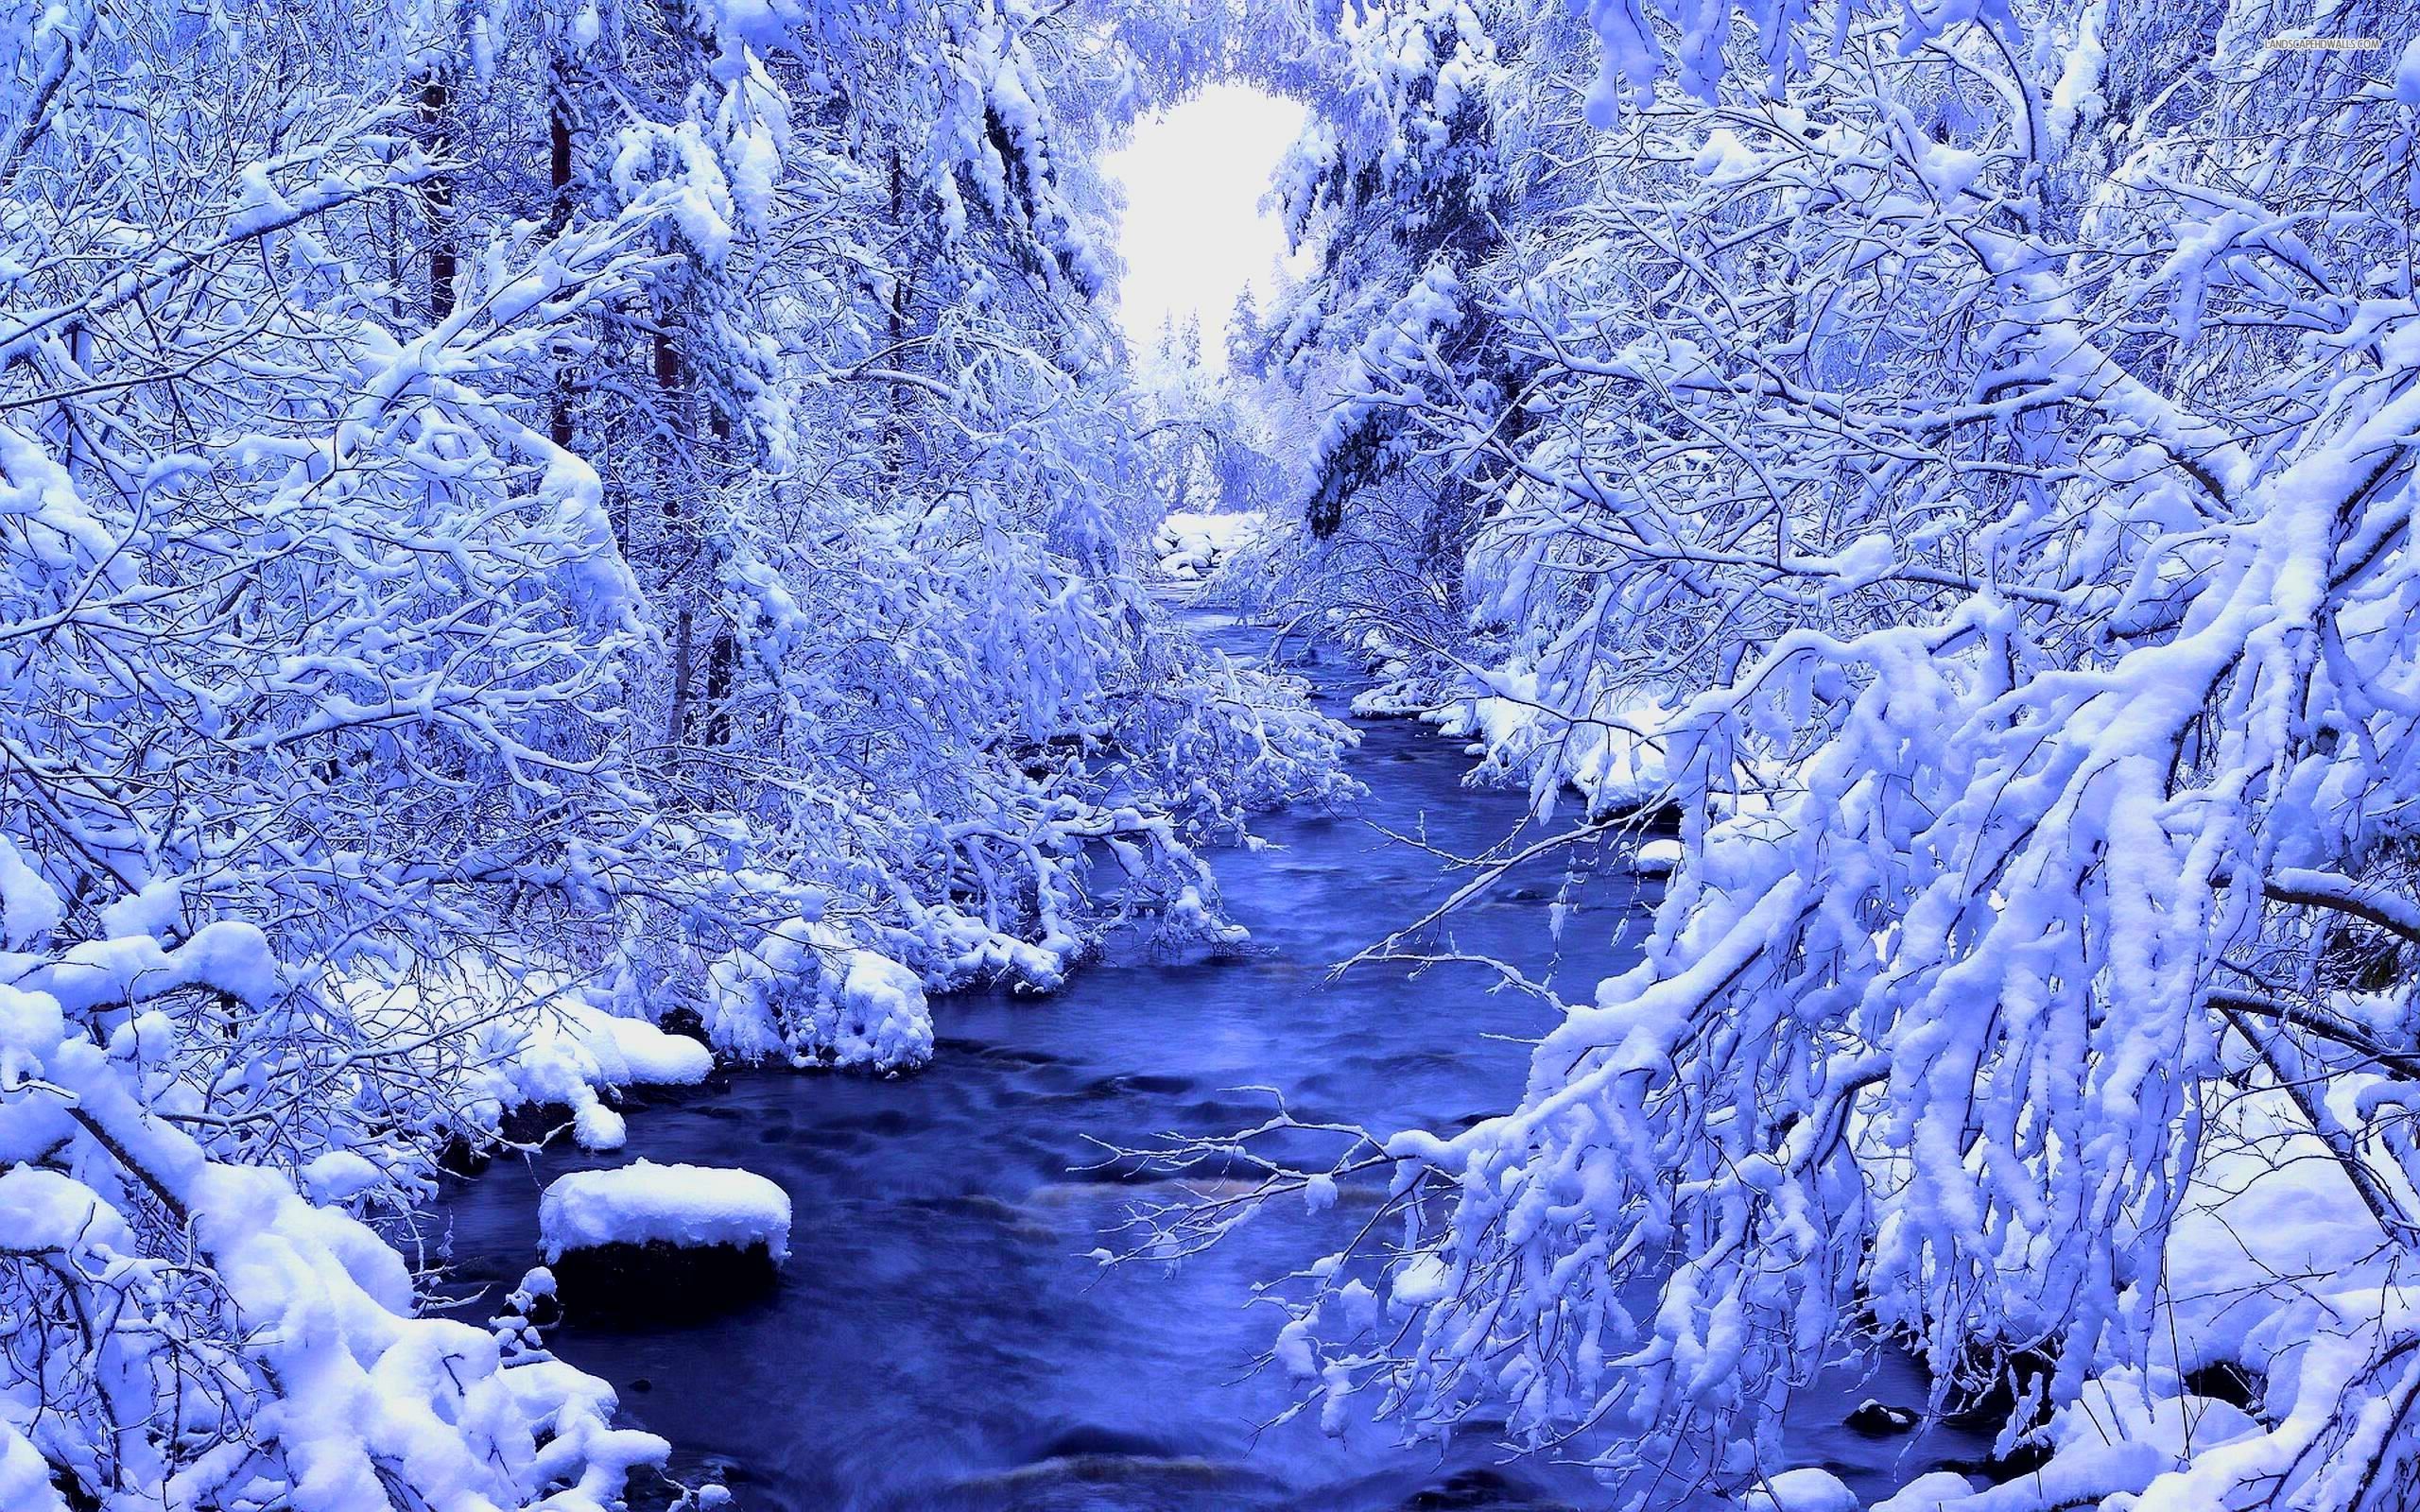 River in winter forest, gallery picture, 2560x1600 p, screen